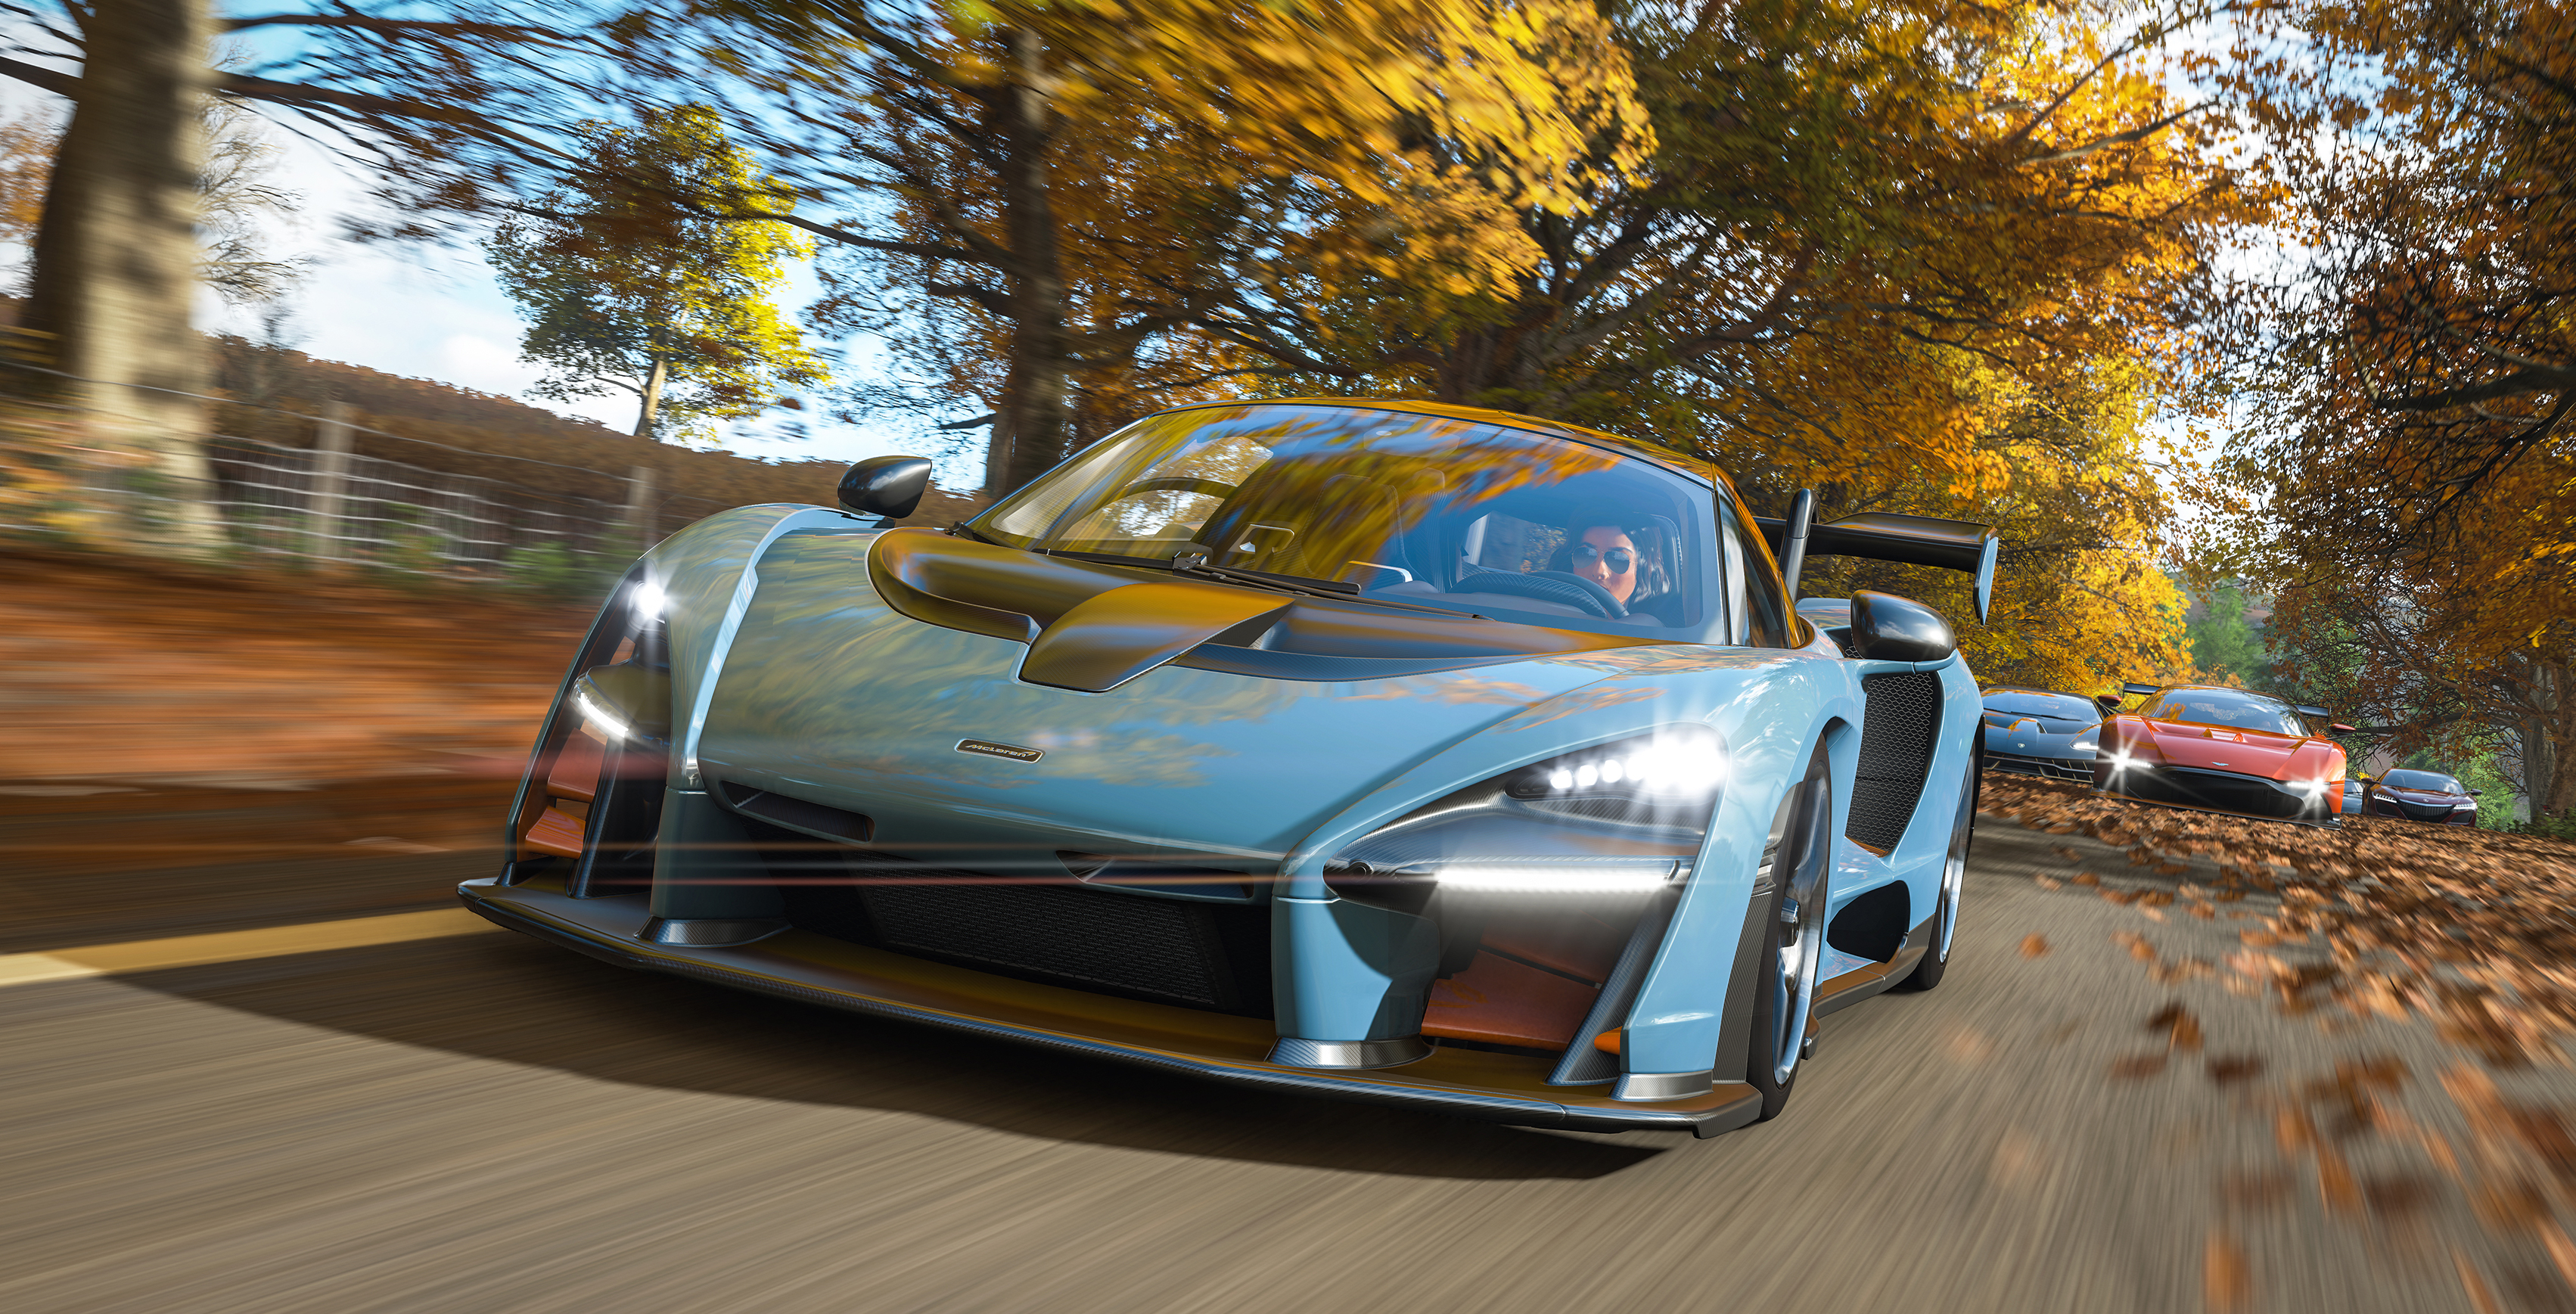  Forza Horizon 4 is coming to Steam next month 